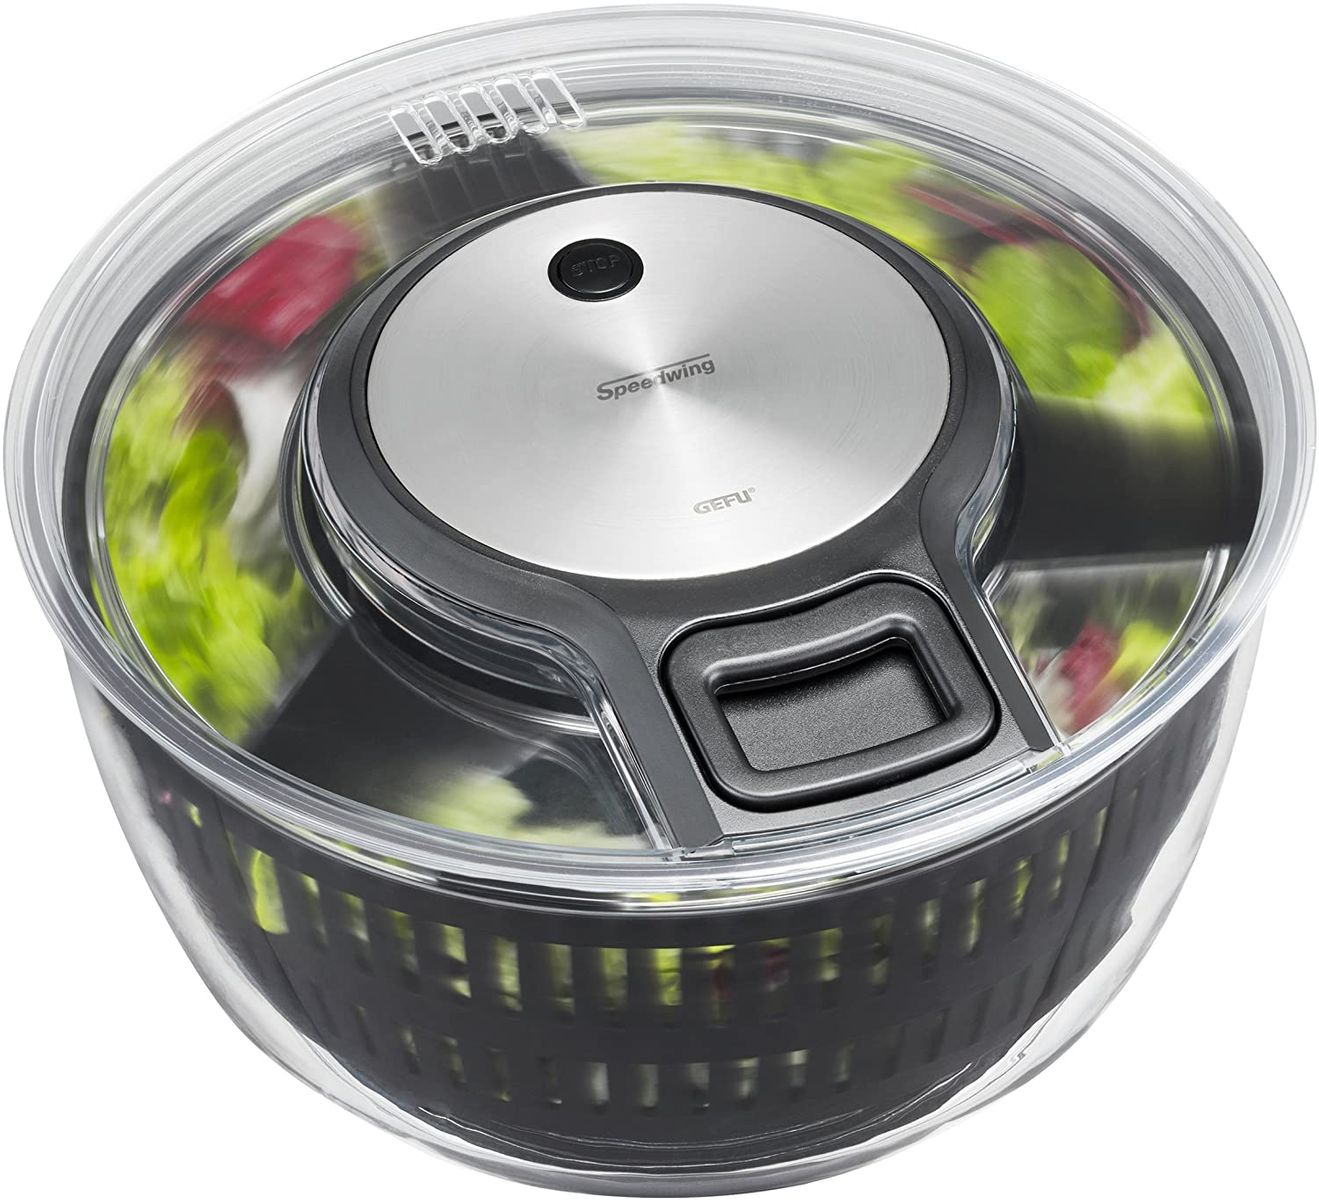 GEFU Speedwing 28150 Salad Spinner with Drain Strainer for Water and Salad Bowl - Gentle Spinning